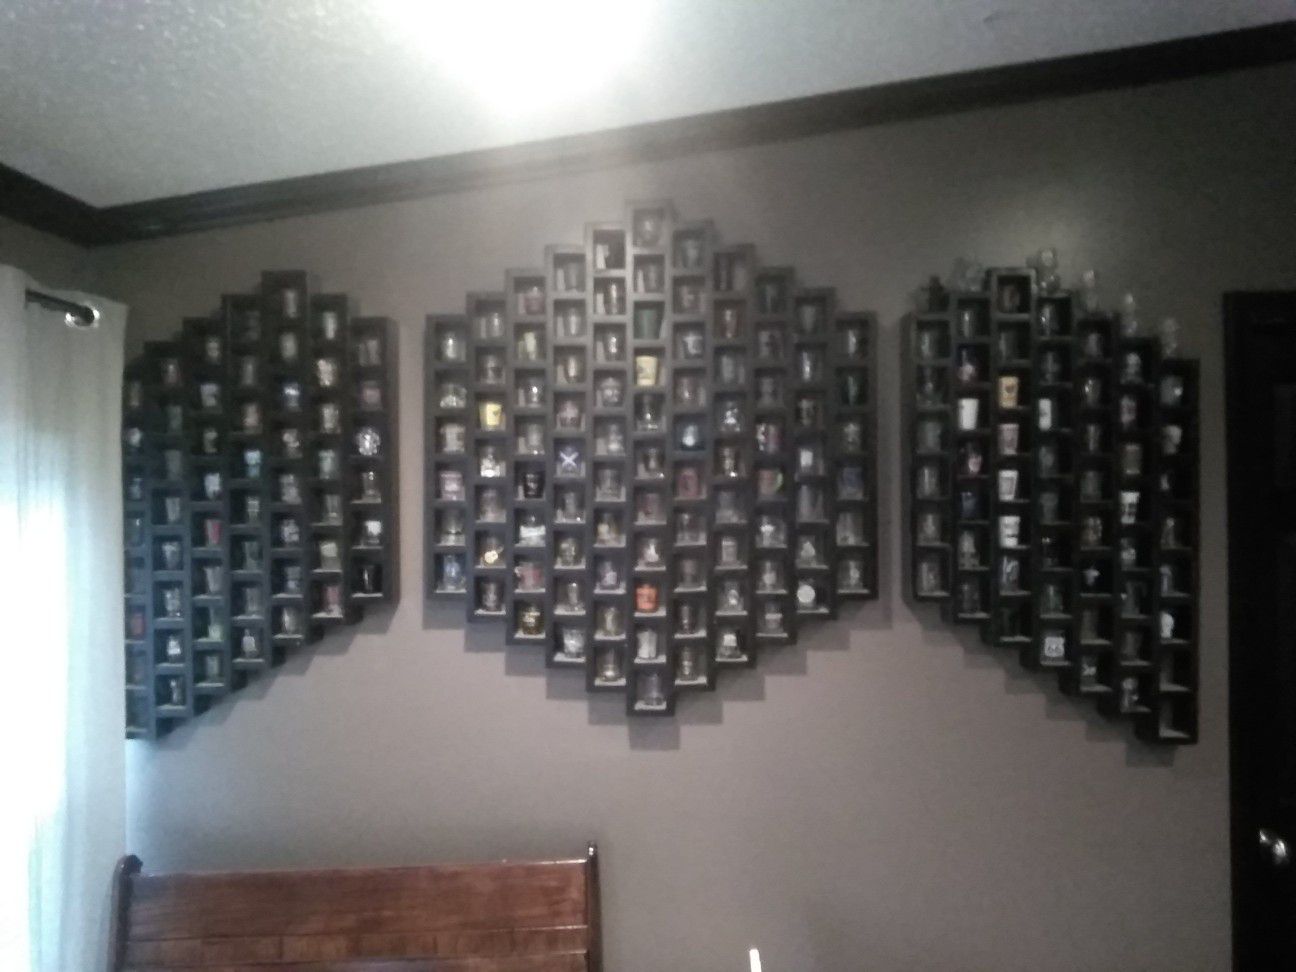 Shot glass collection with custom shelves